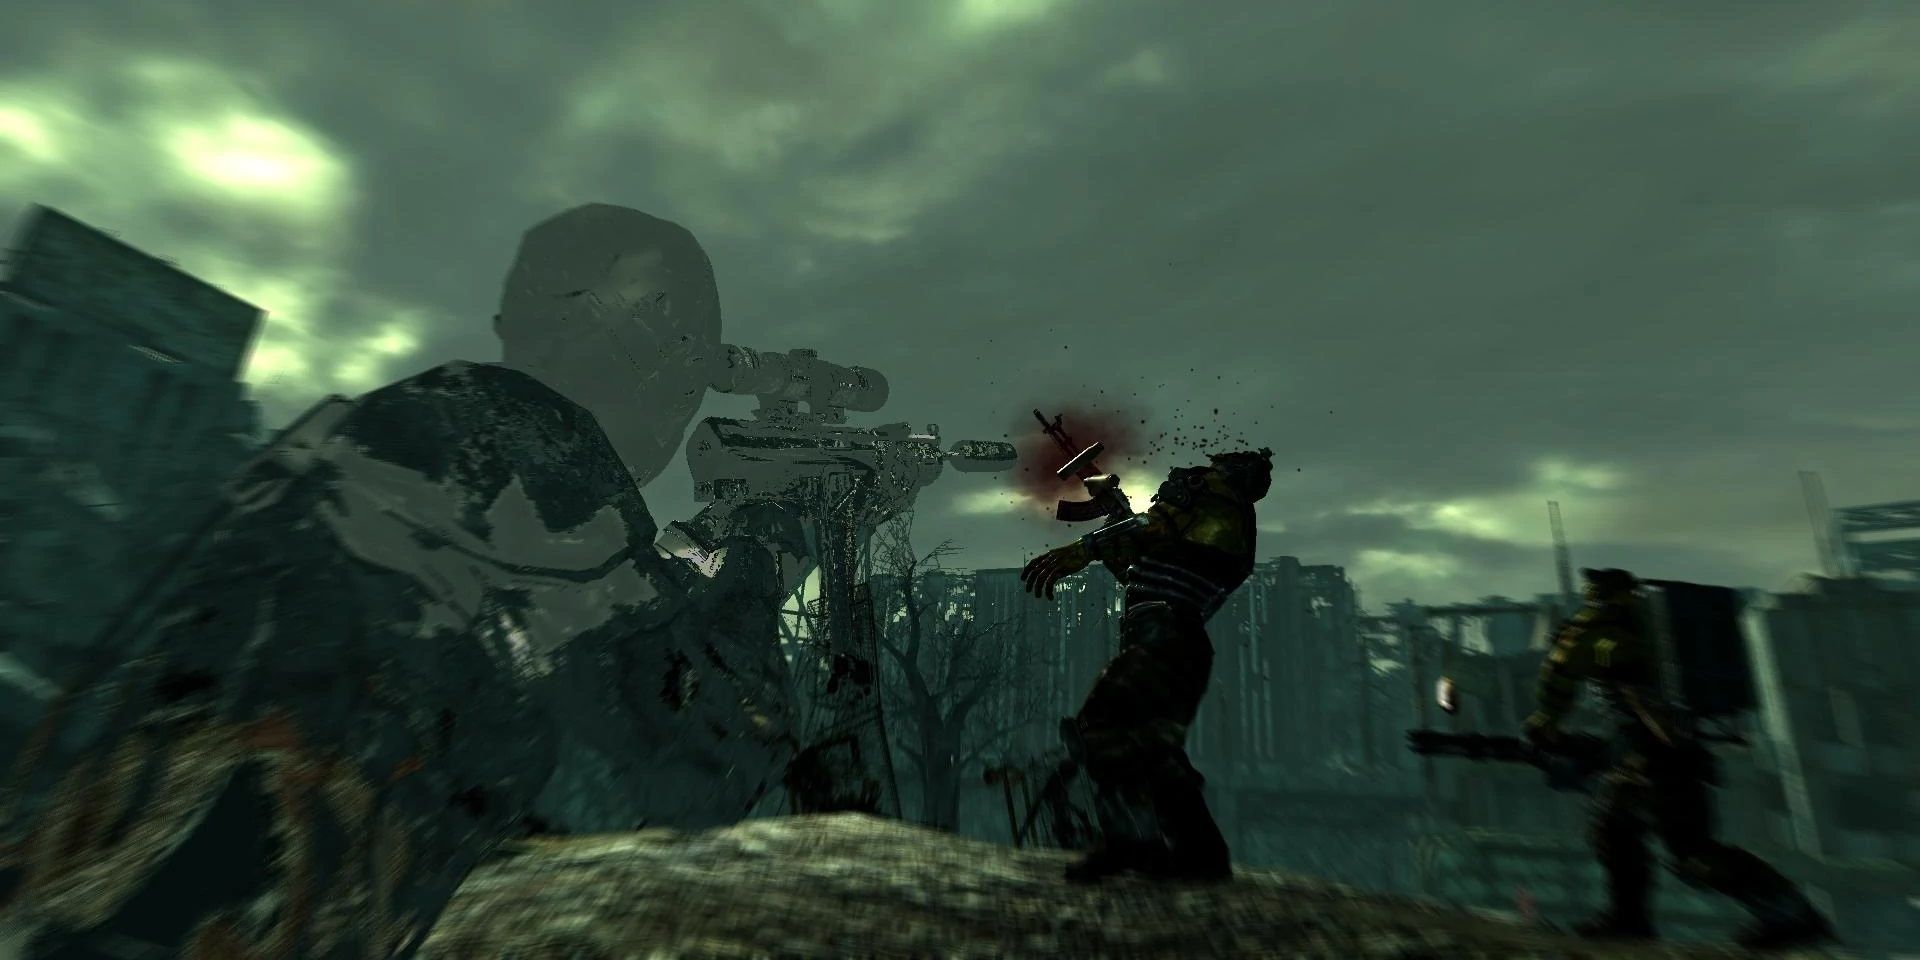 Sneak Attack From Fallout 3